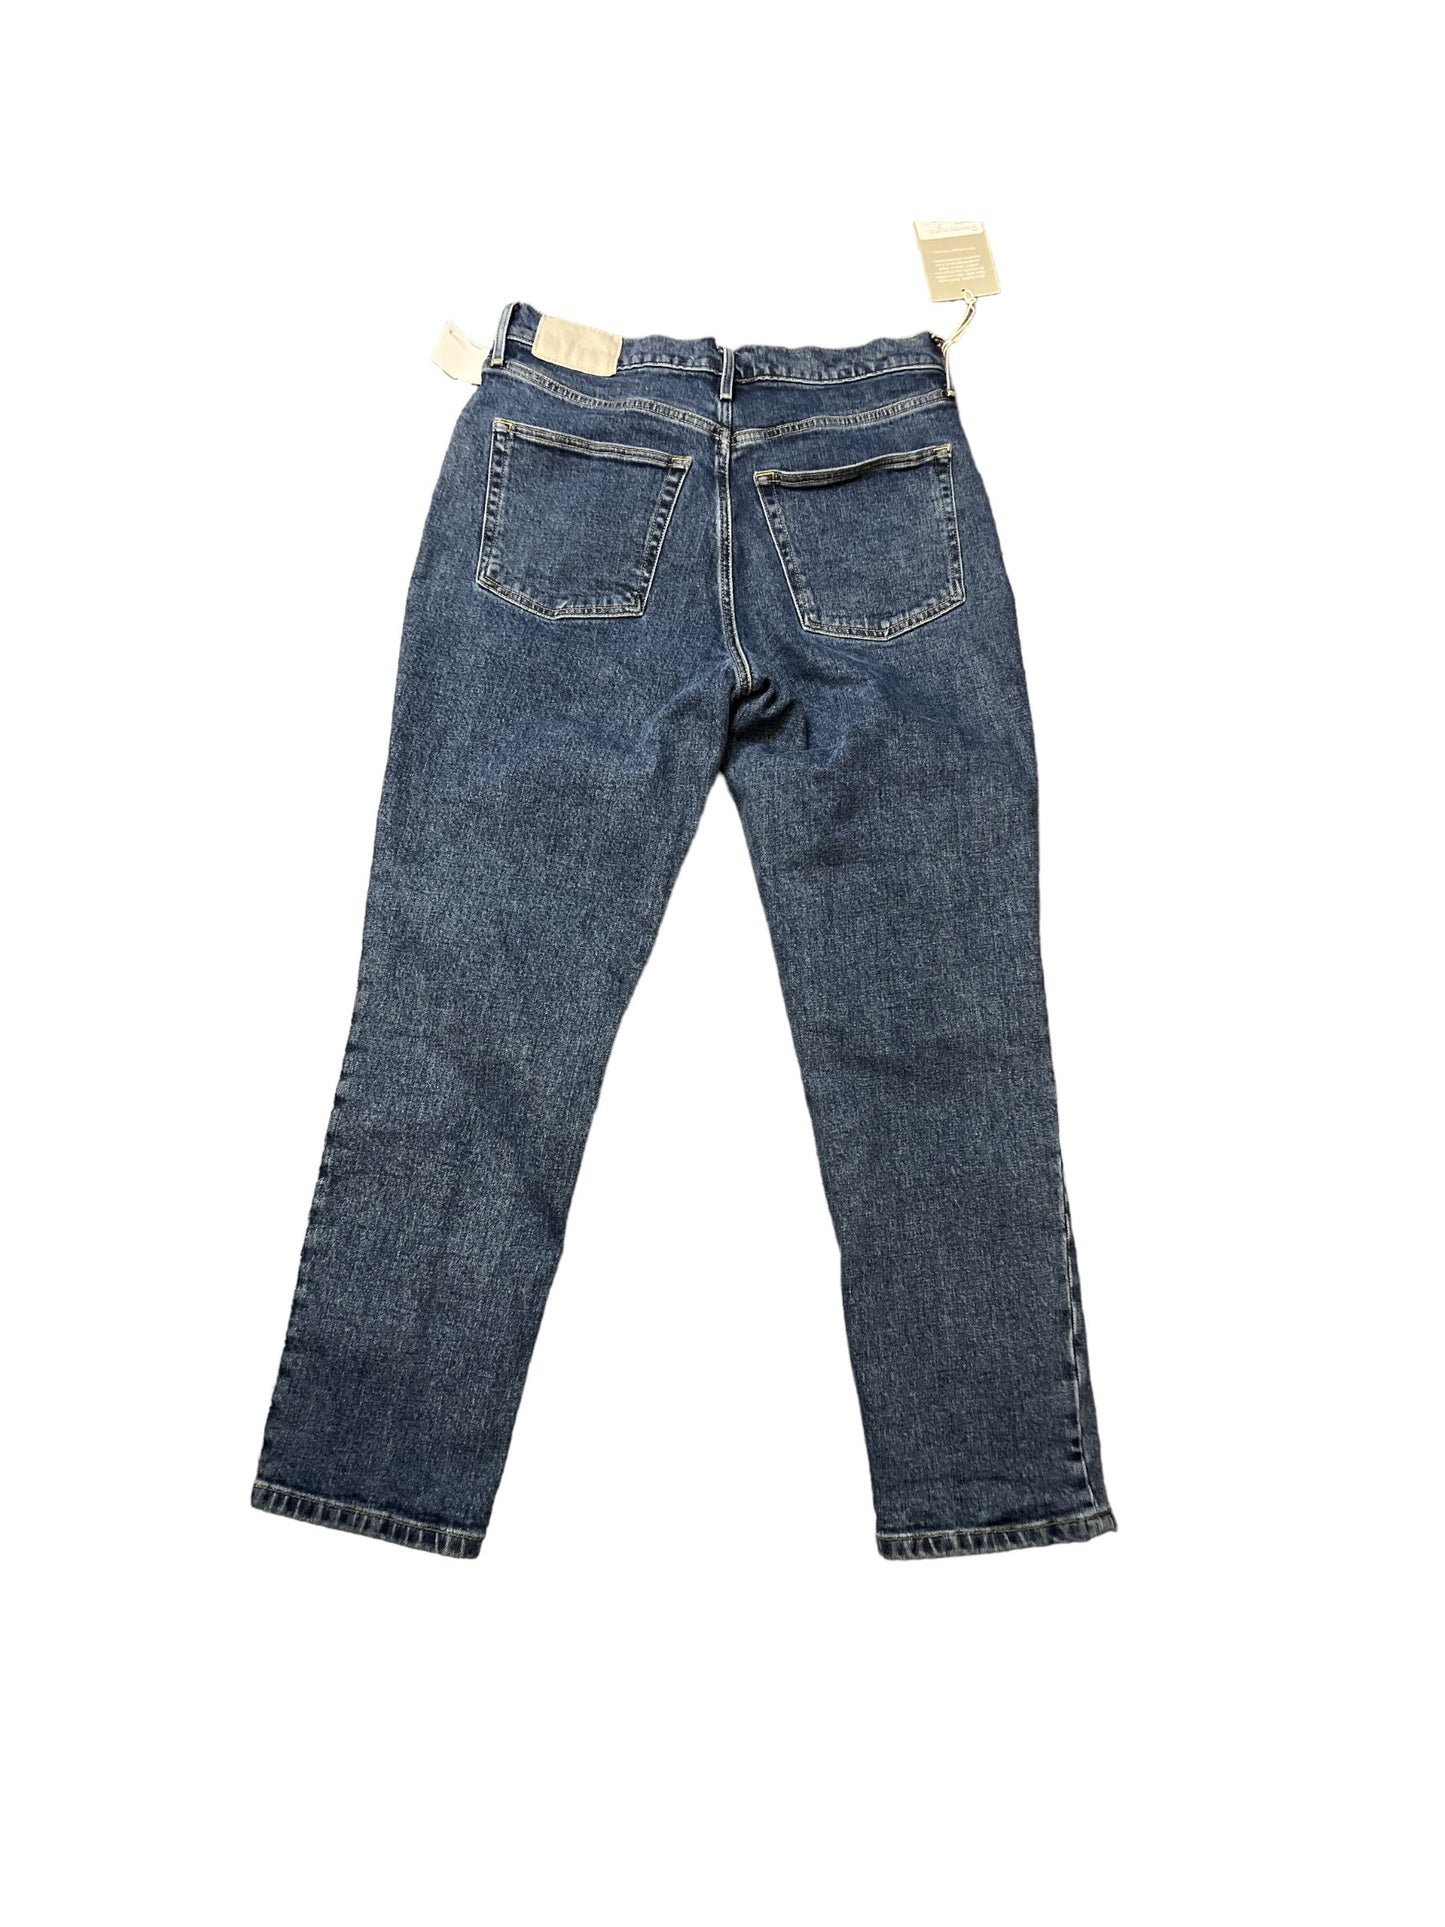 Jeans Skinny By Everlane  Size: 6